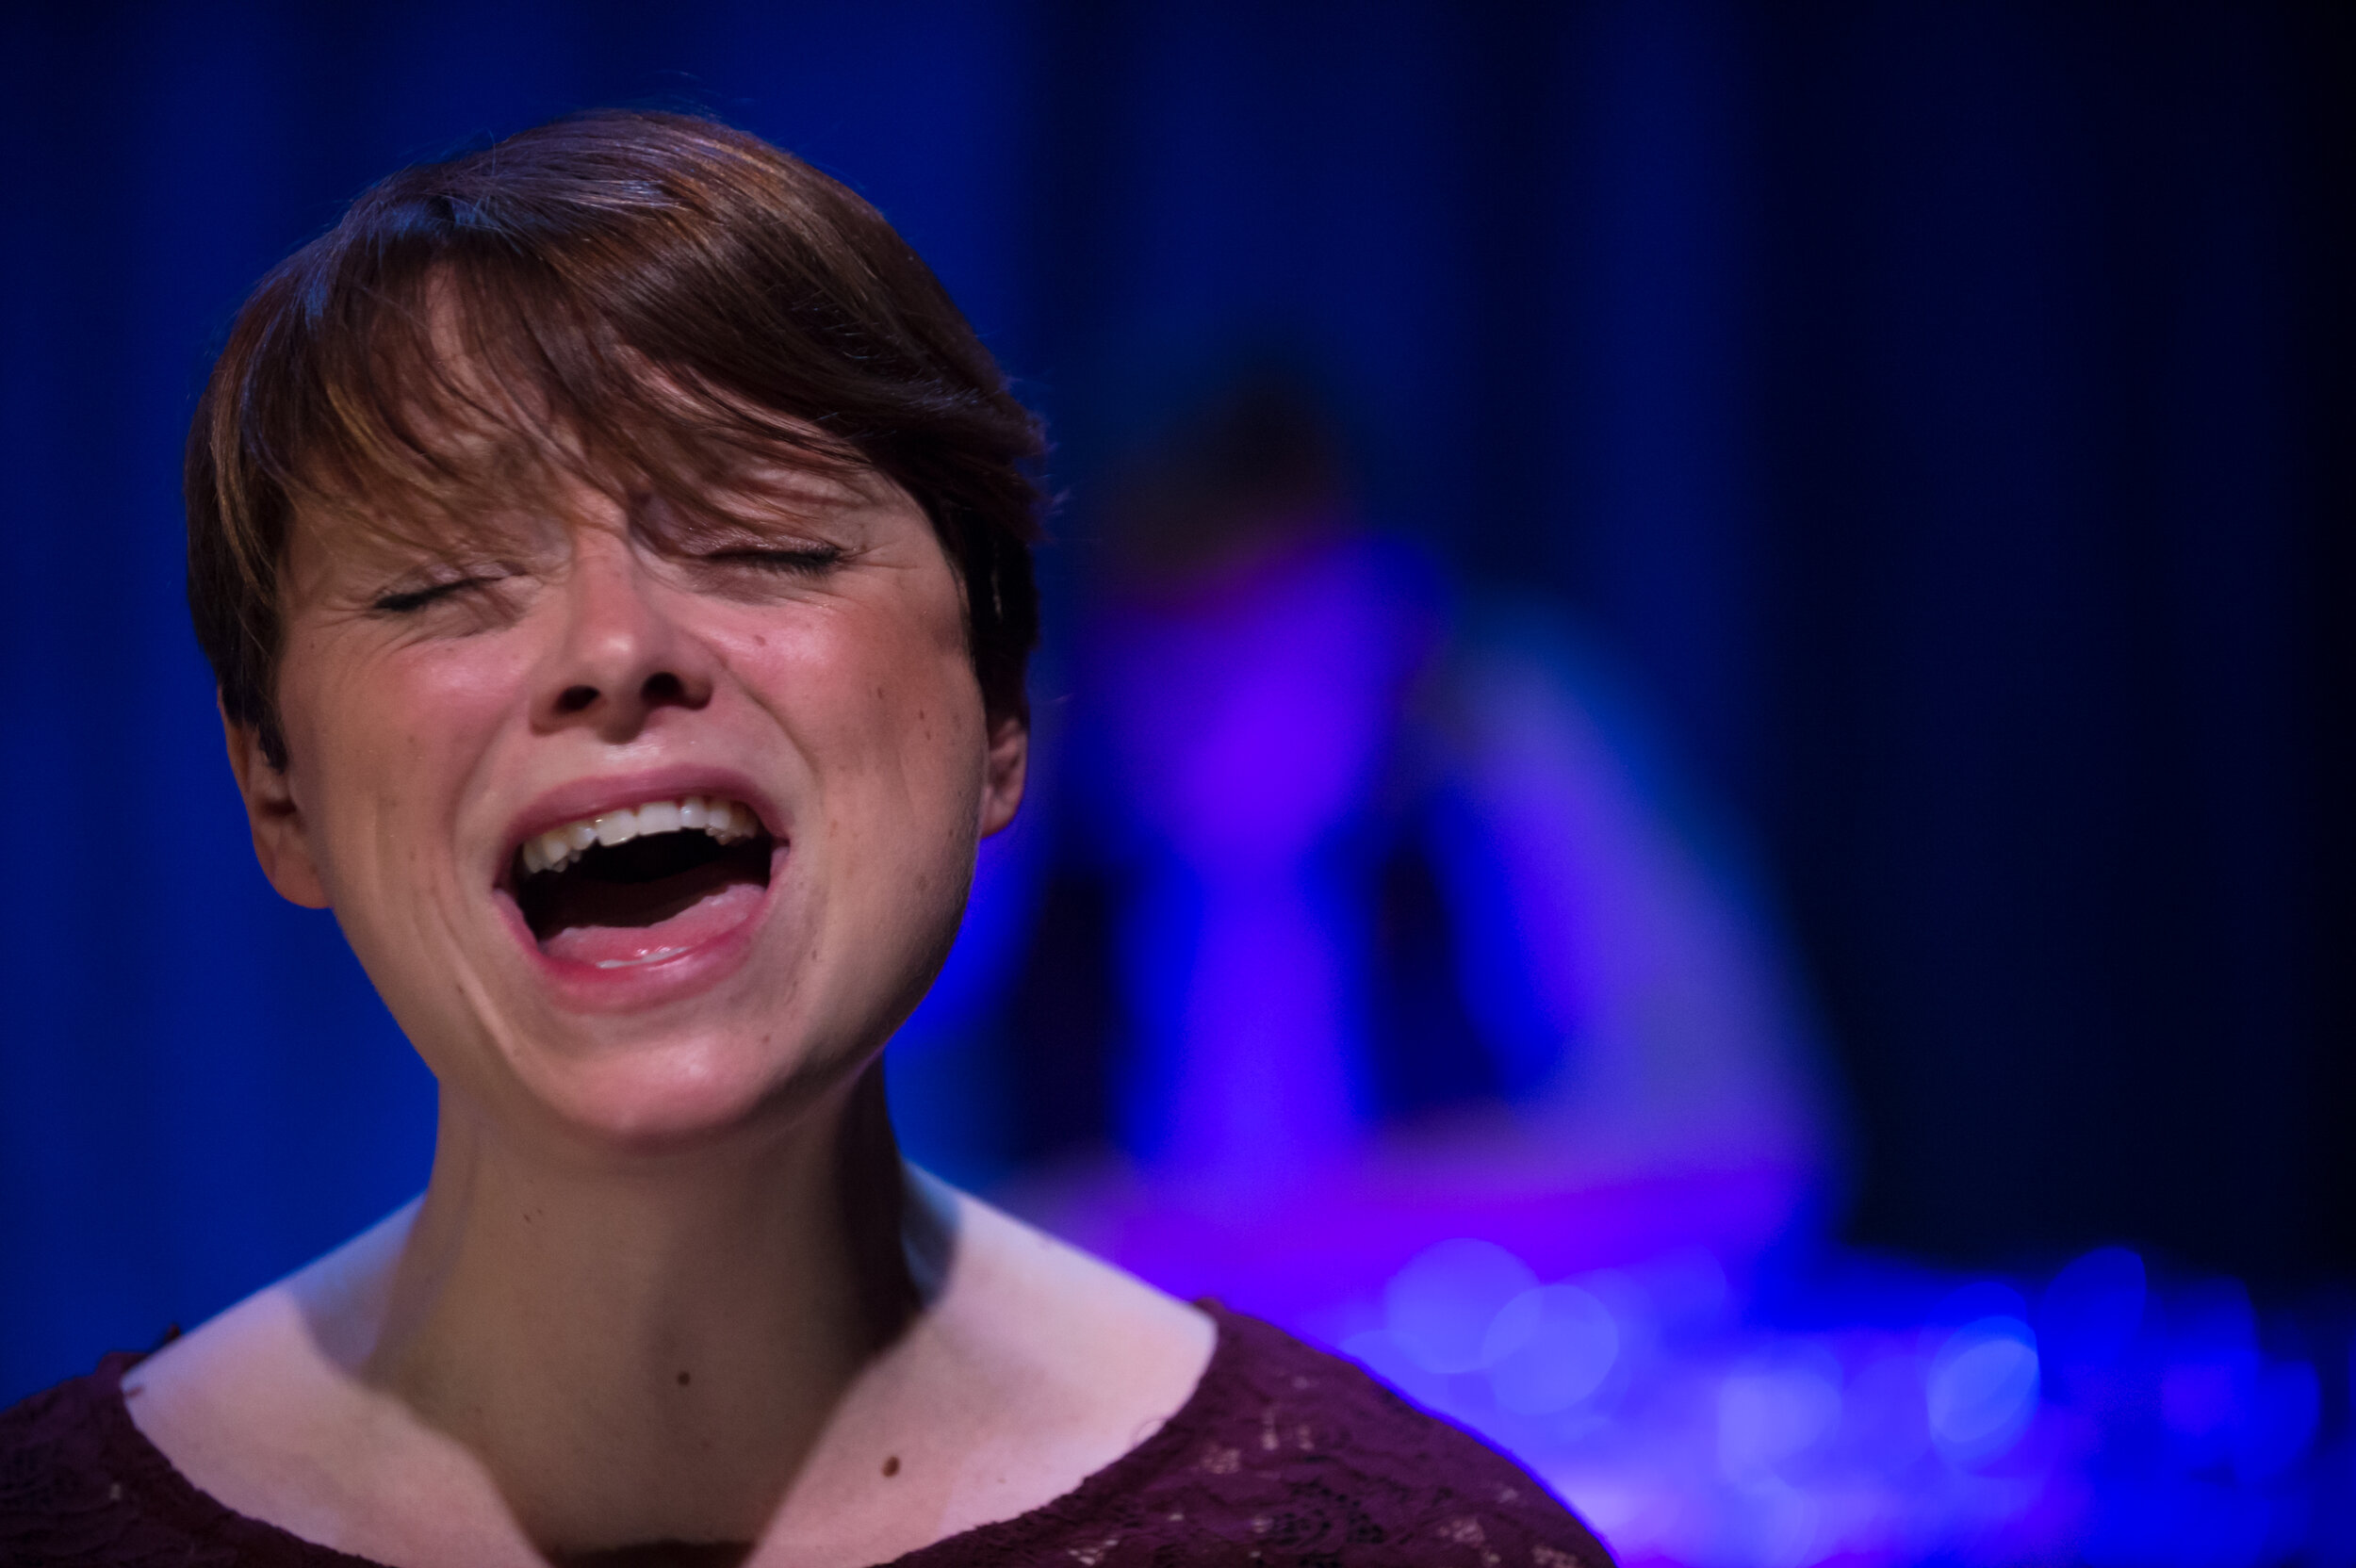  A woman singing with an expressive facial expression. 